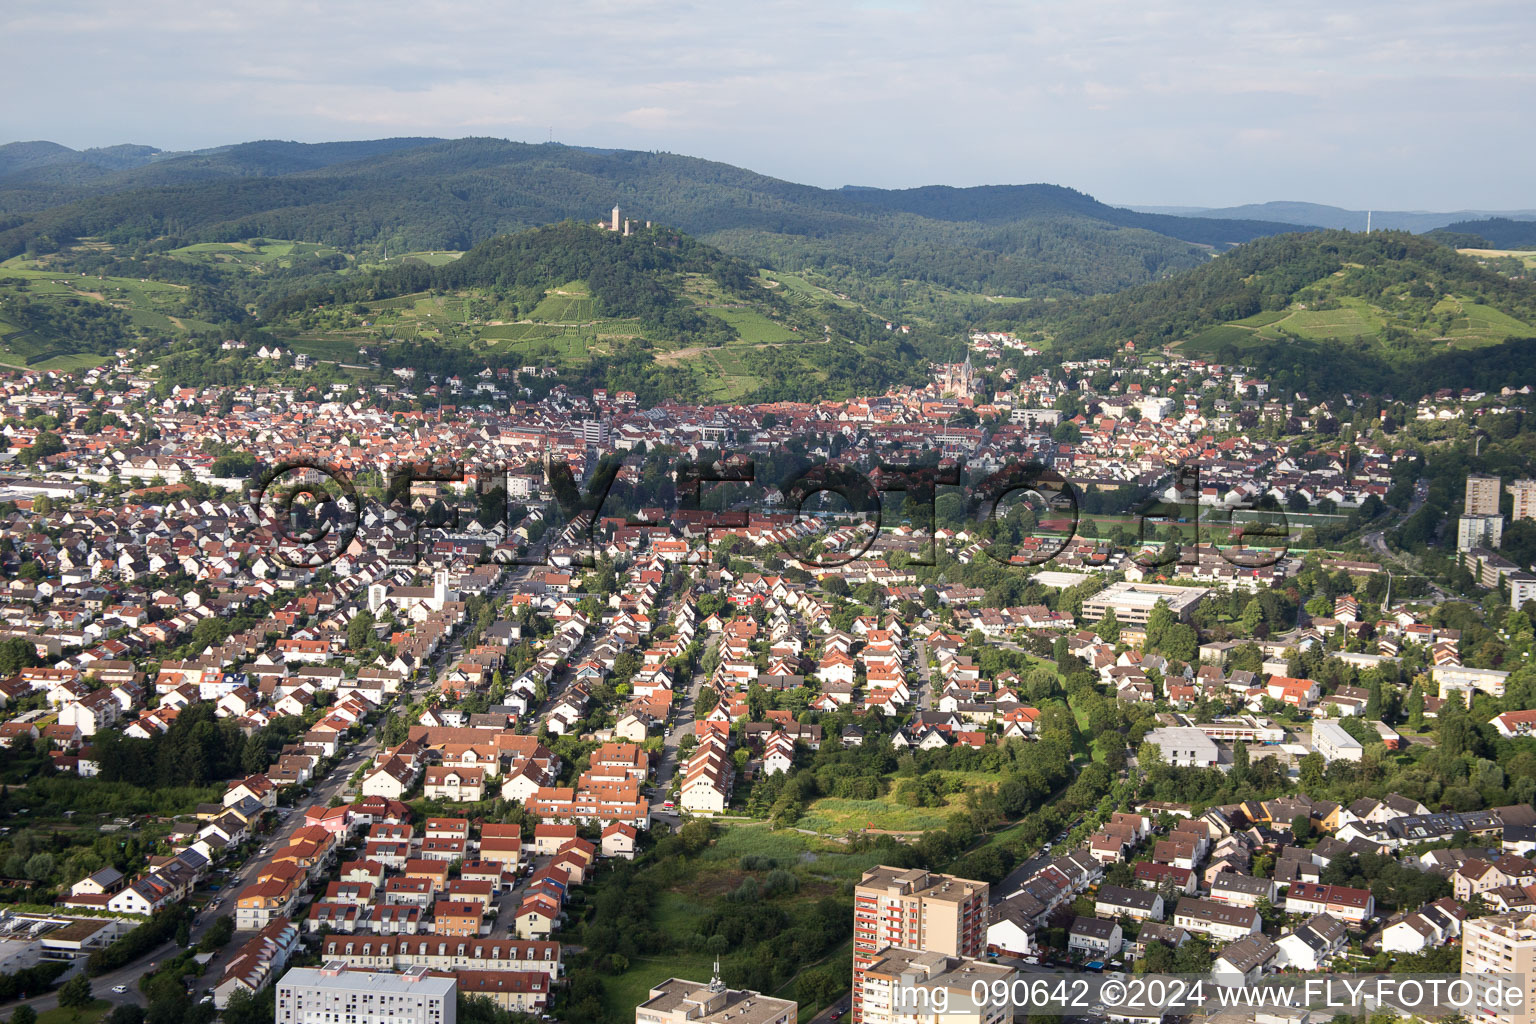 Heppenheim in Heppenheim an der Bergstrasse in the state Hesse, Germany seen from above